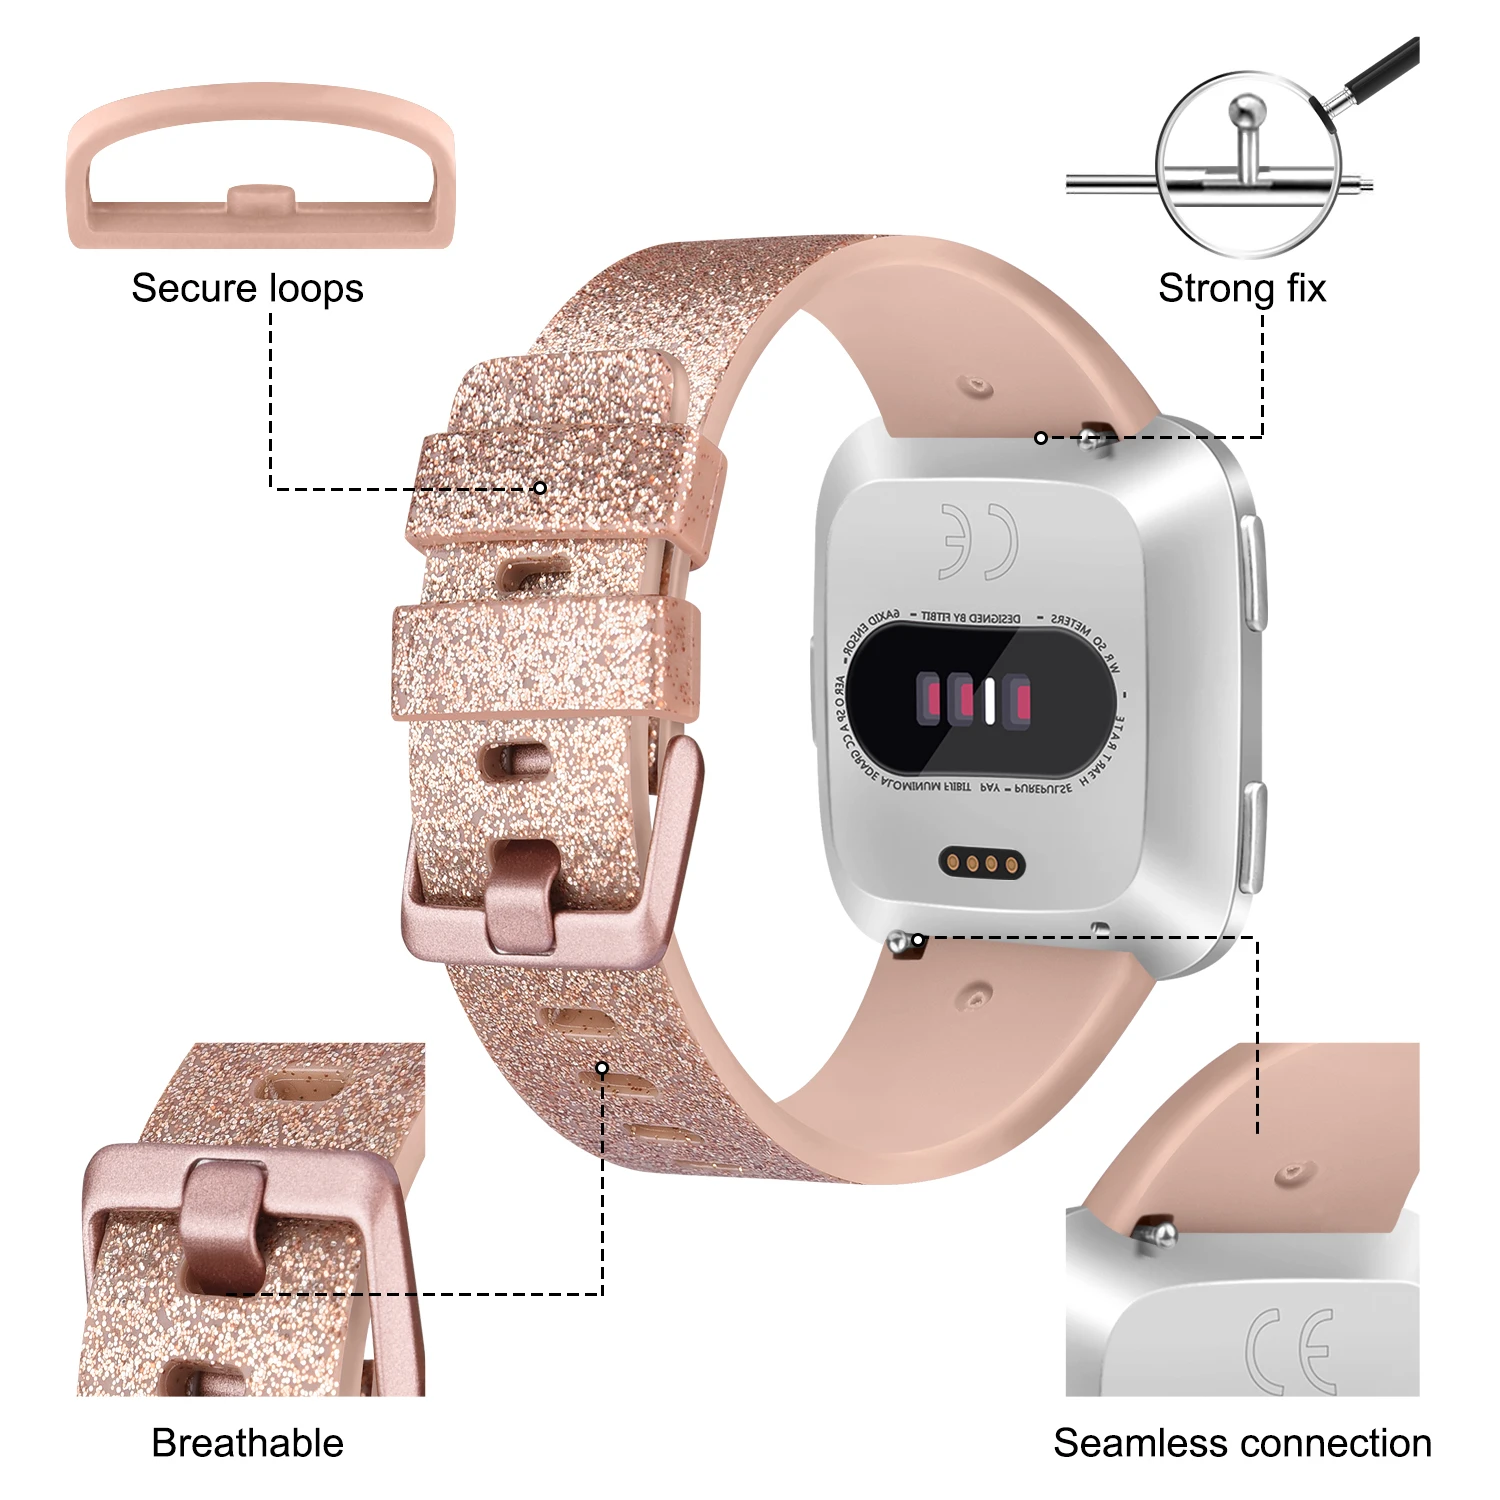 Replacement Bracelet Strap For Fitbit Versa 2 Versa 1 Lite Band Watchband For Fitbit Versa 2 Versa Lite Wristband Accessory